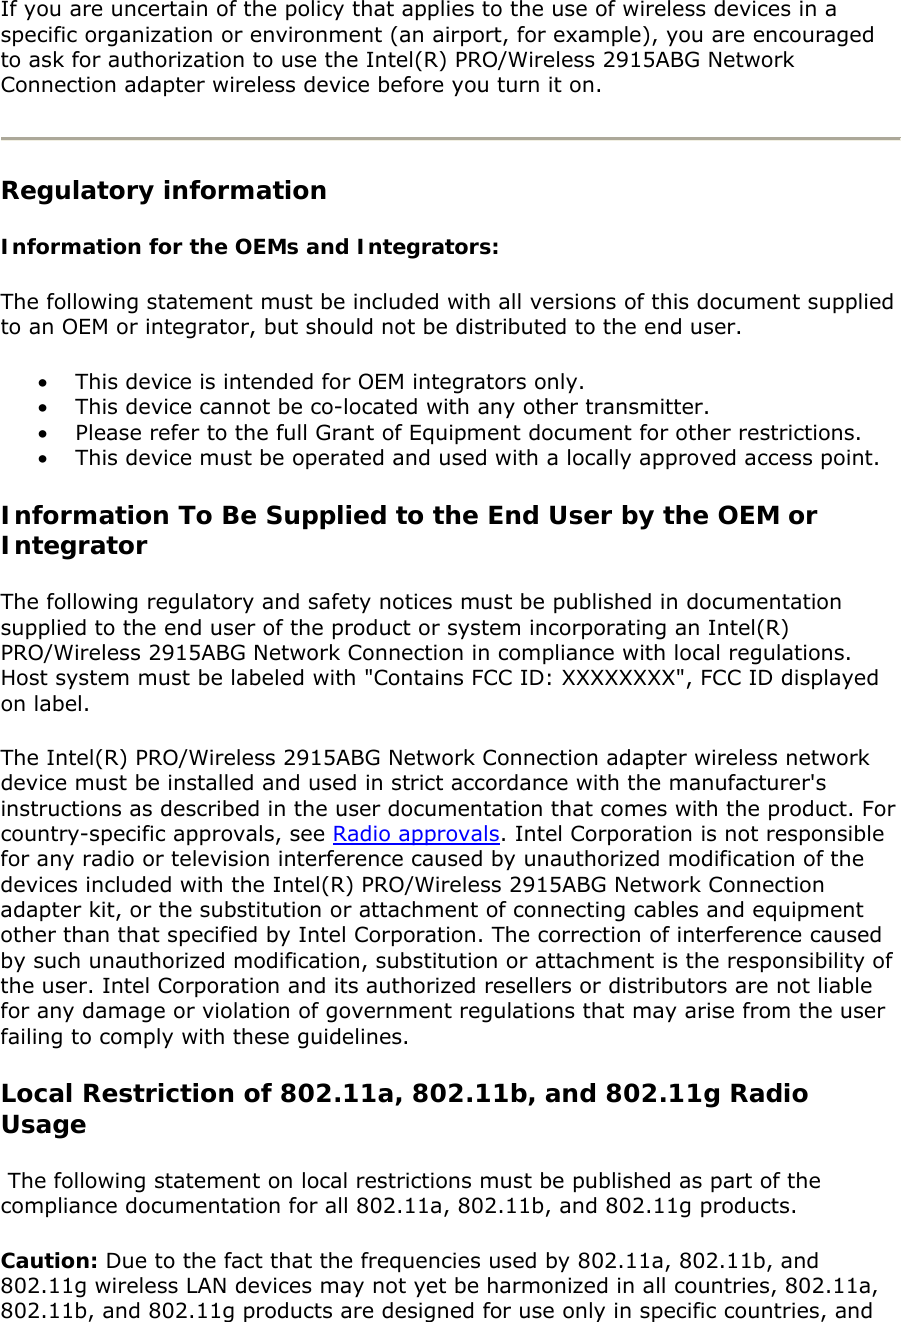 If you are uncertain of the policy that applies to the use of wireless devices in a specific organization or environment (an airport, for example), you are encouraged to ask for authorization to use the Intel(R) PRO/Wireless 2915ABG Network Connection adapter wireless device before you turn it on.   Regulatory information Information for the OEMs and Integrators:   The following statement must be included with all versions of this document supplied to an OEM or integrator, but should not be distributed to the end user.  • This device is intended for OEM integrators only.  • This device cannot be co-located with any other transmitter. • Please refer to the full Grant of Equipment document for other restrictions. • This device must be operated and used with a locally approved access point. Information To Be Supplied to the End User by the OEM or Integrator  The following regulatory and safety notices must be published in documentation supplied to the end user of the product or system incorporating an Intel(R) PRO/Wireless 2915ABG Network Connection in compliance with local regulations.  Host system must be labeled with &quot;Contains FCC ID: XXXXXXXX&quot;, FCC ID displayed on label.  The Intel(R) PRO/Wireless 2915ABG Network Connection adapter wireless network device must be installed and used in strict accordance with the manufacturer&apos;s instructions as described in the user documentation that comes with the product. For country-specific approvals, see Radio approvals. Intel Corporation is not responsible for any radio or television interference caused by unauthorized modification of the devices included with the Intel(R) PRO/Wireless 2915ABG Network Connection adapter kit, or the substitution or attachment of connecting cables and equipment other than that specified by Intel Corporation. The correction of interference caused by such unauthorized modification, substitution or attachment is the responsibility of the user. Intel Corporation and its authorized resellers or distributors are not liable for any damage or violation of government regulations that may arise from the user failing to comply with these guidelines.  Local Restriction of 802.11a, 802.11b, and 802.11g Radio Usage   The following statement on local restrictions must be published as part of the compliance documentation for all 802.11a, 802.11b, and 802.11g products.  Caution: Due to the fact that the frequencies used by 802.11a, 802.11b, and 802.11g wireless LAN devices may not yet be harmonized in all countries, 802.11a, 802.11b, and 802.11g products are designed for use only in specific countries, and 